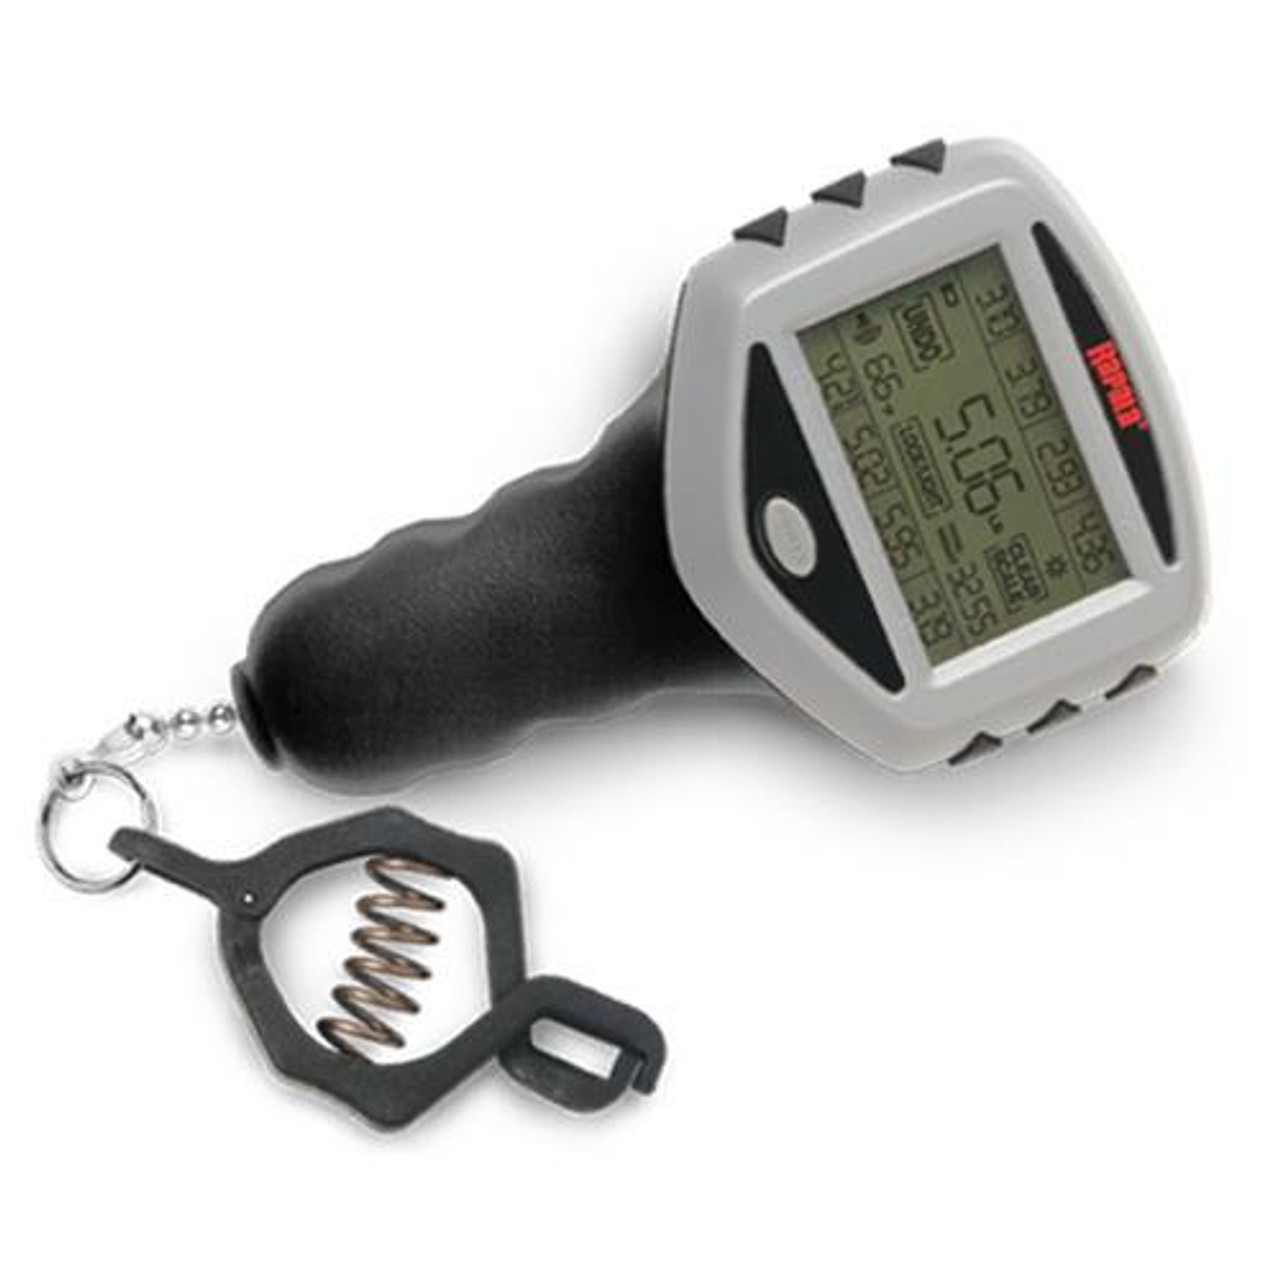 Rapala Touch Screen Digital Fish Scale